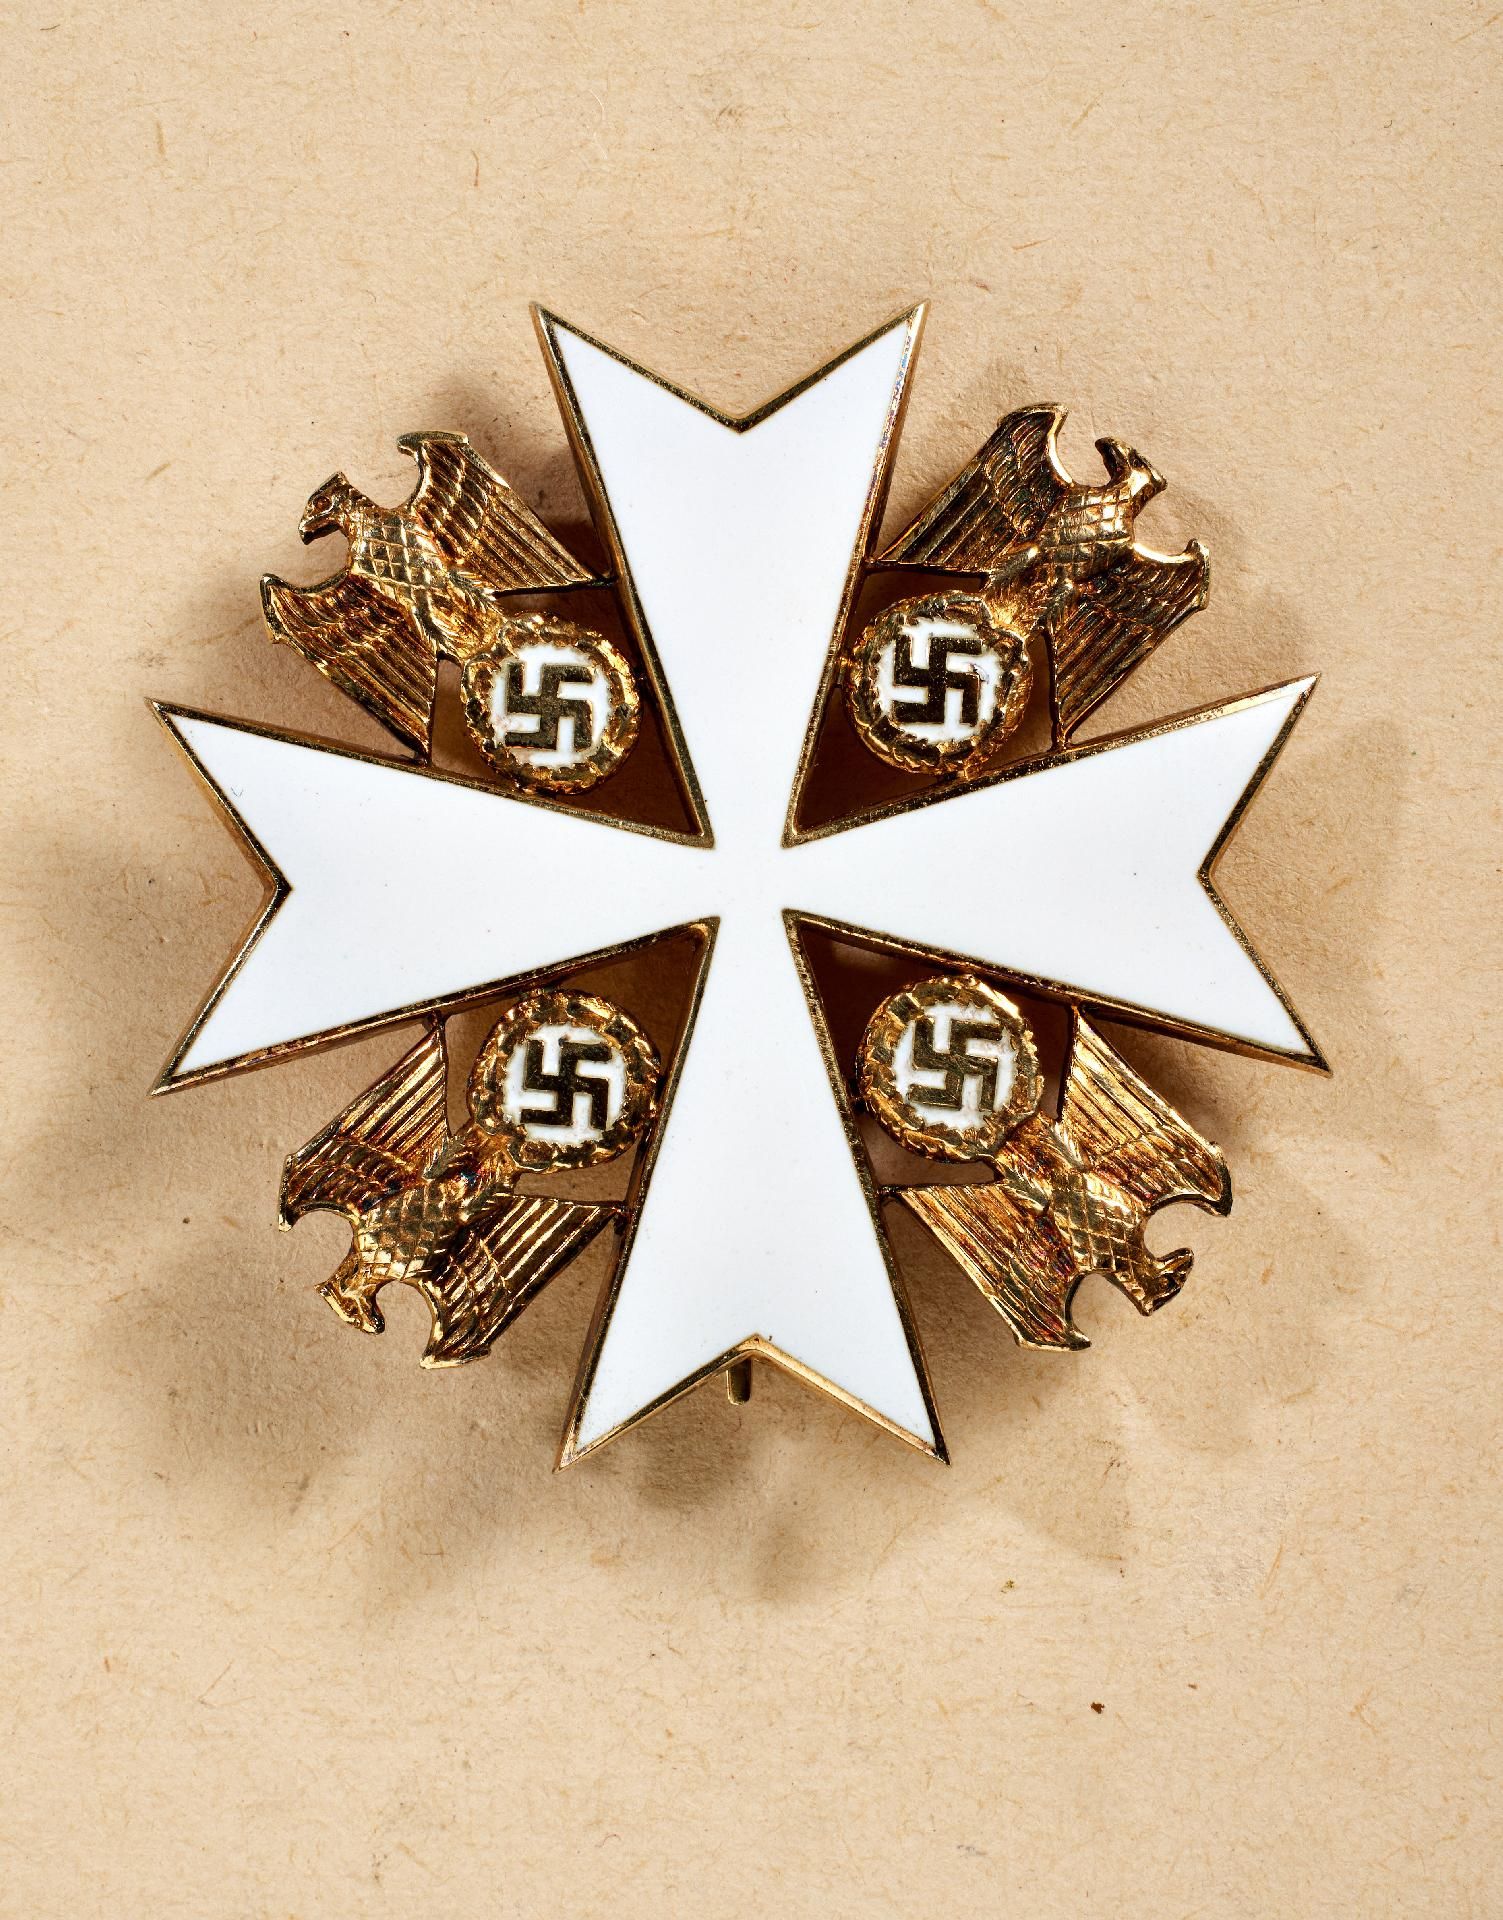 German Eagle Order : Order of the German Eagle: Cross of Merit 2nd Class (4th Class).